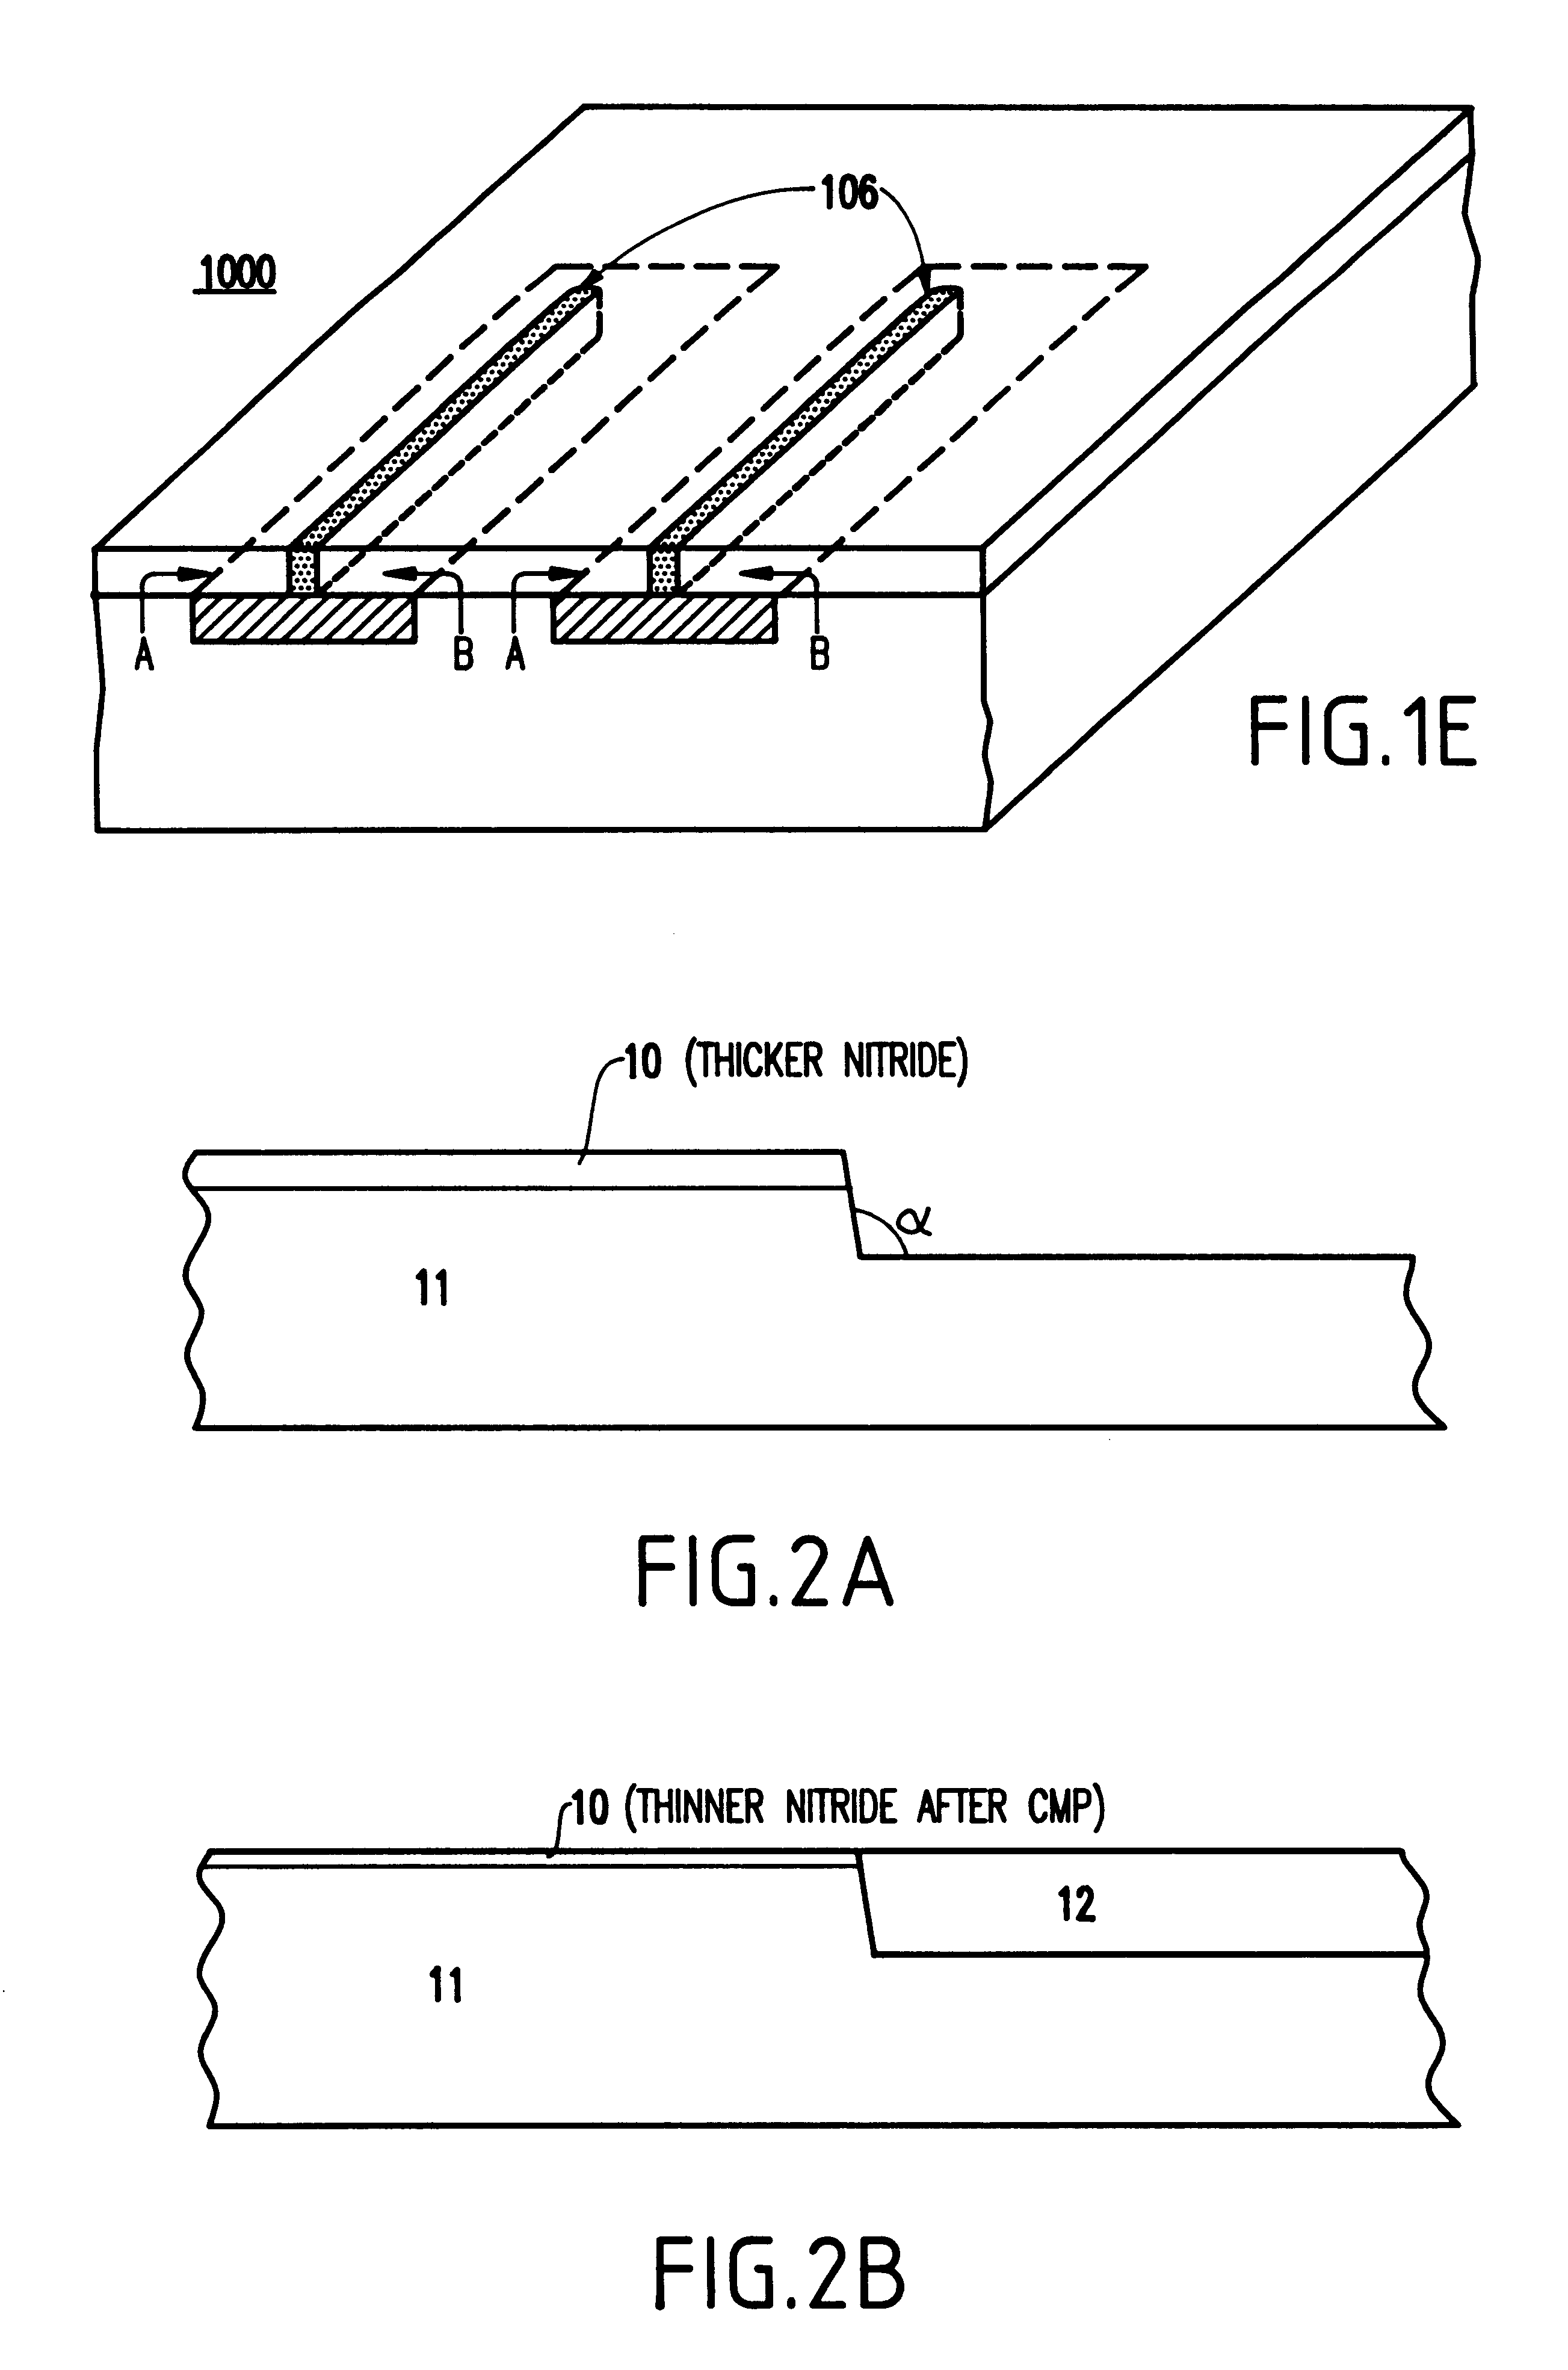 Method for fabricating complementary metal oxide semiconductor (CMOS) devices on a mixed bulk and silicon-on-insulator (SOI) substrate